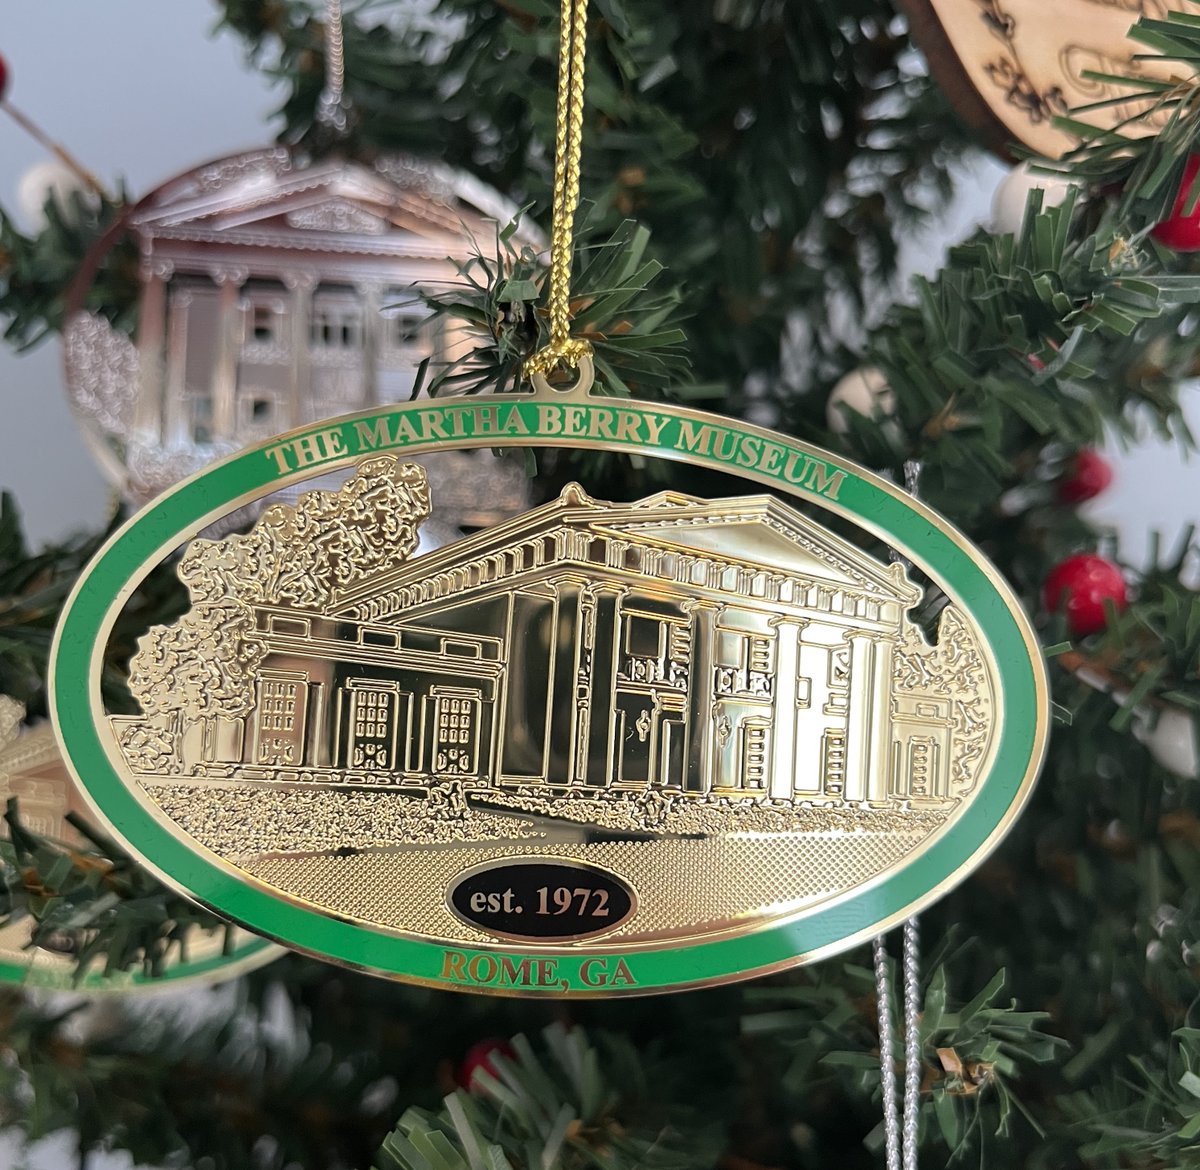 🎄🎁 Our gift shop has some great items for the holiday season! We have some new items for sale, including commemorative ornaments. Get an Oak Hill or Martha Berry Museum ornament for you or your loved ones today! 🎄🎁